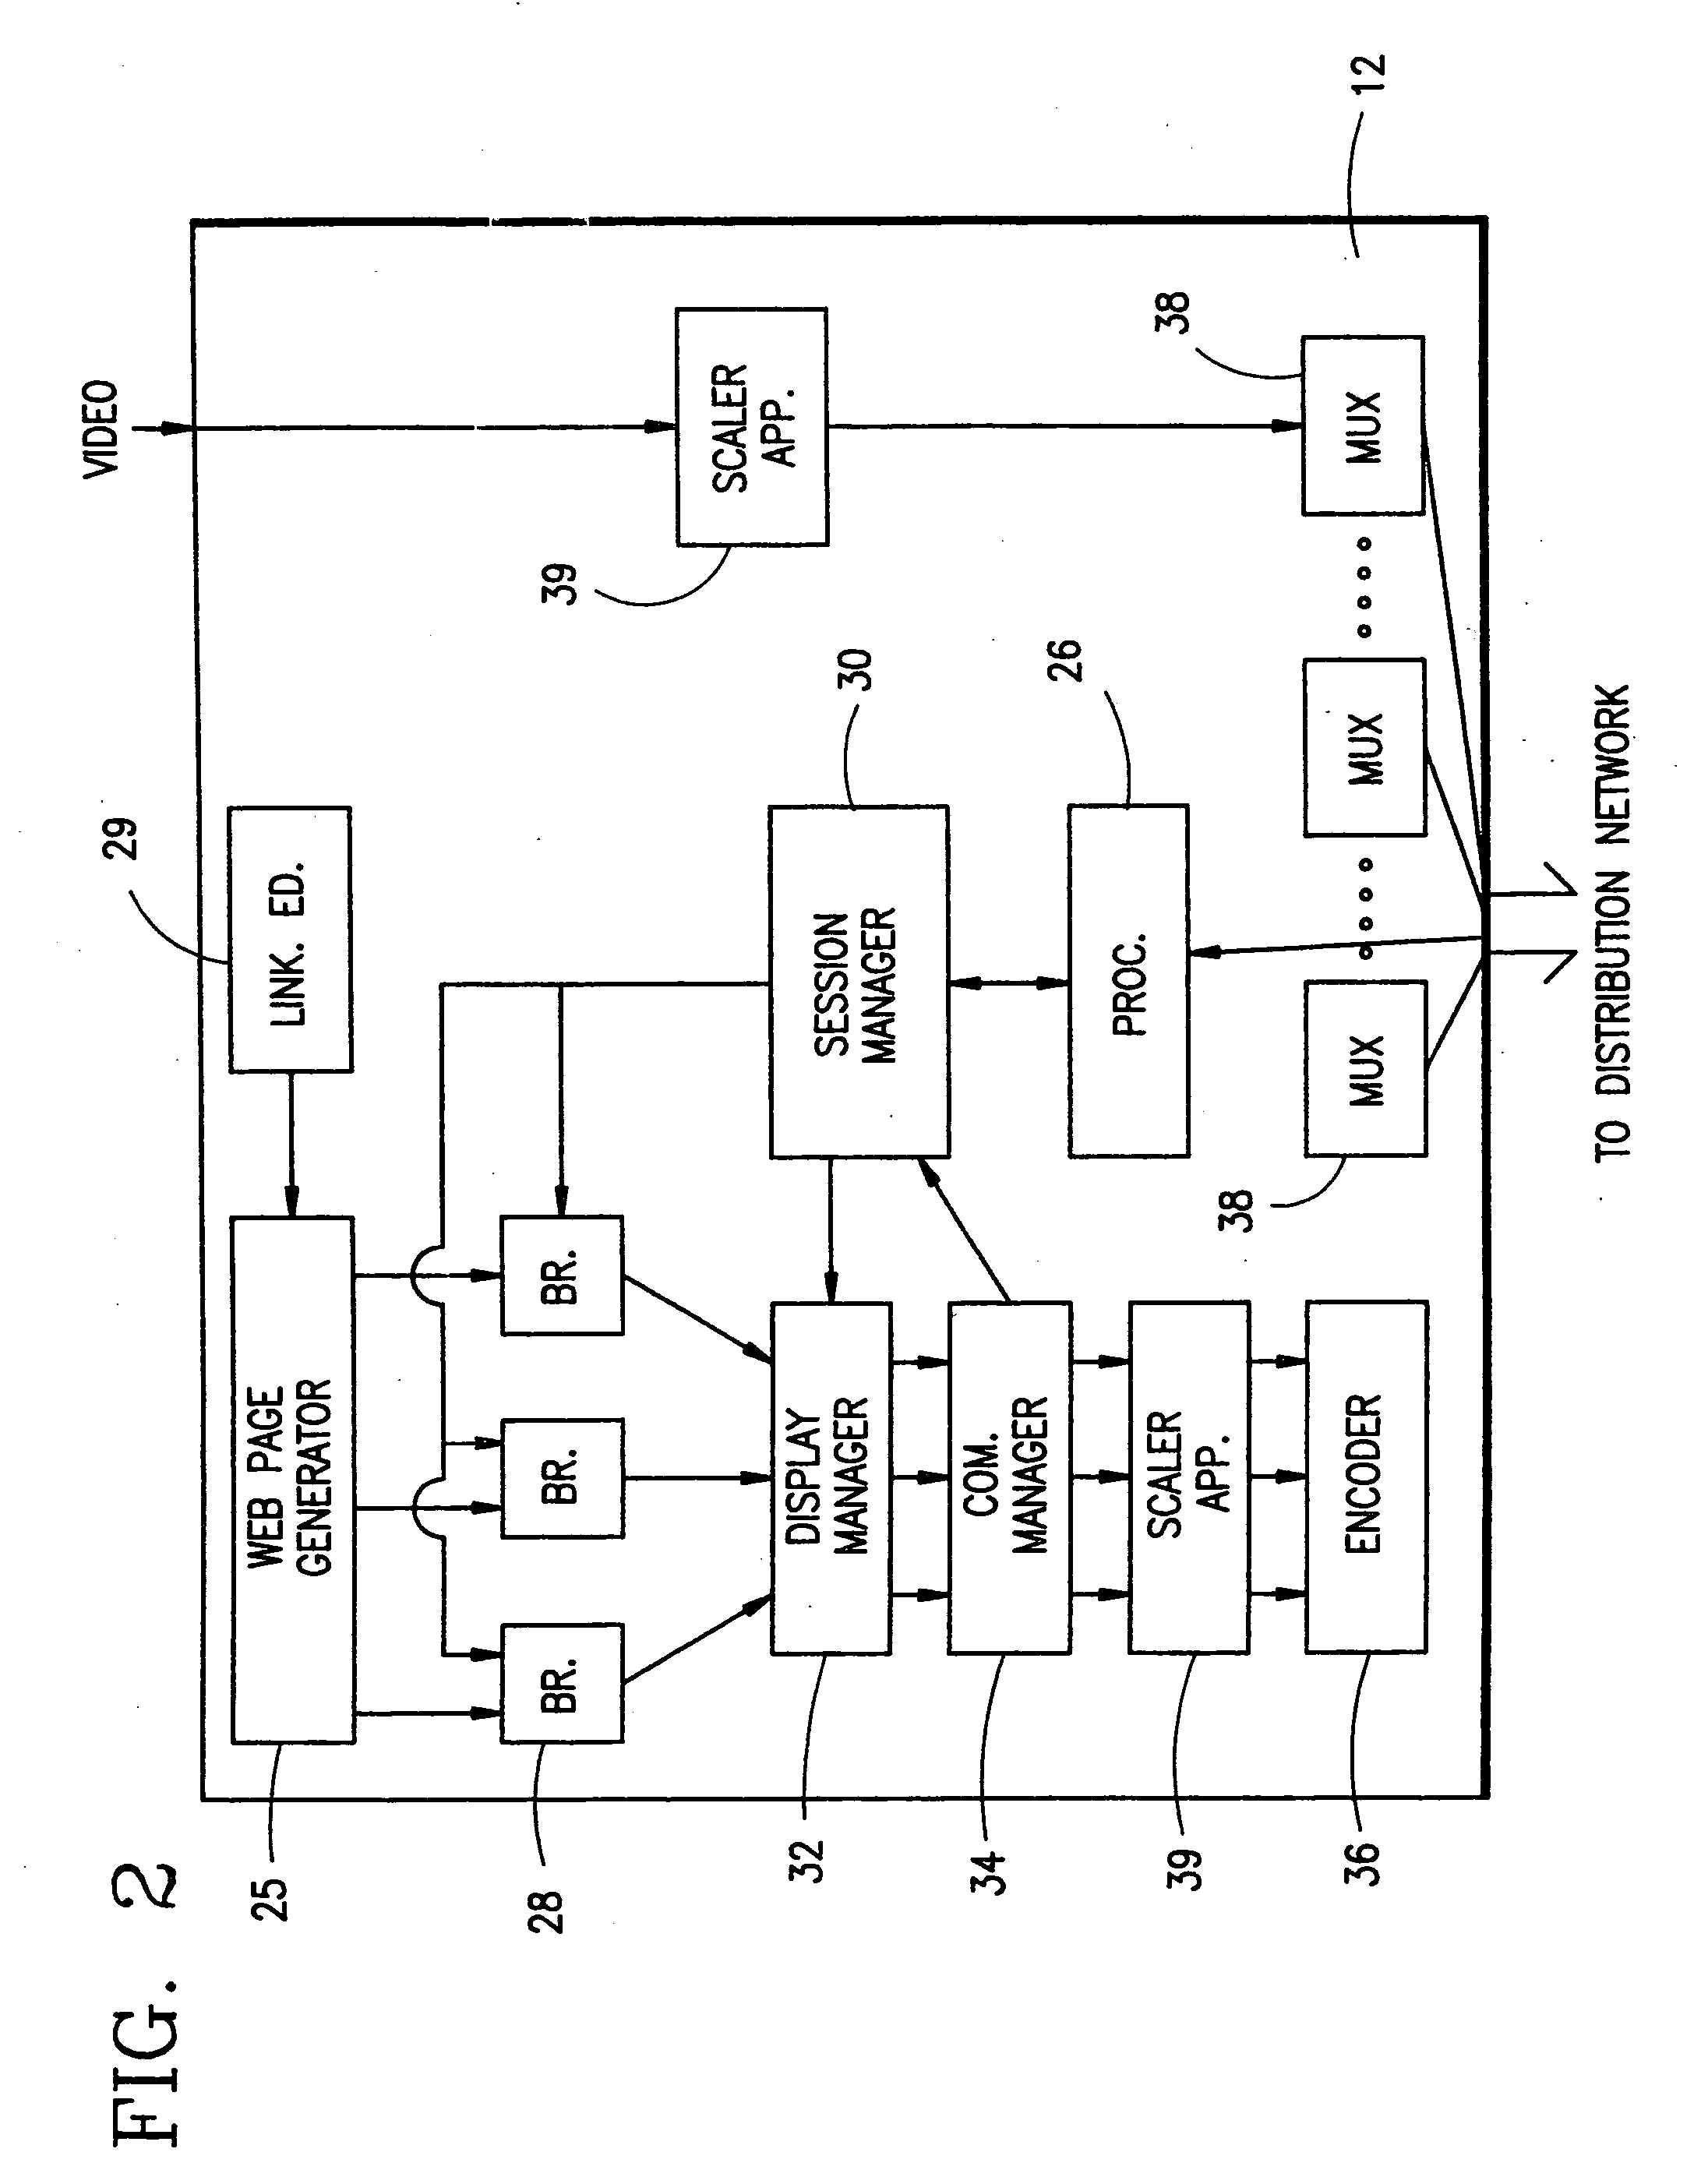 System and method for broadcasting web pages and other information